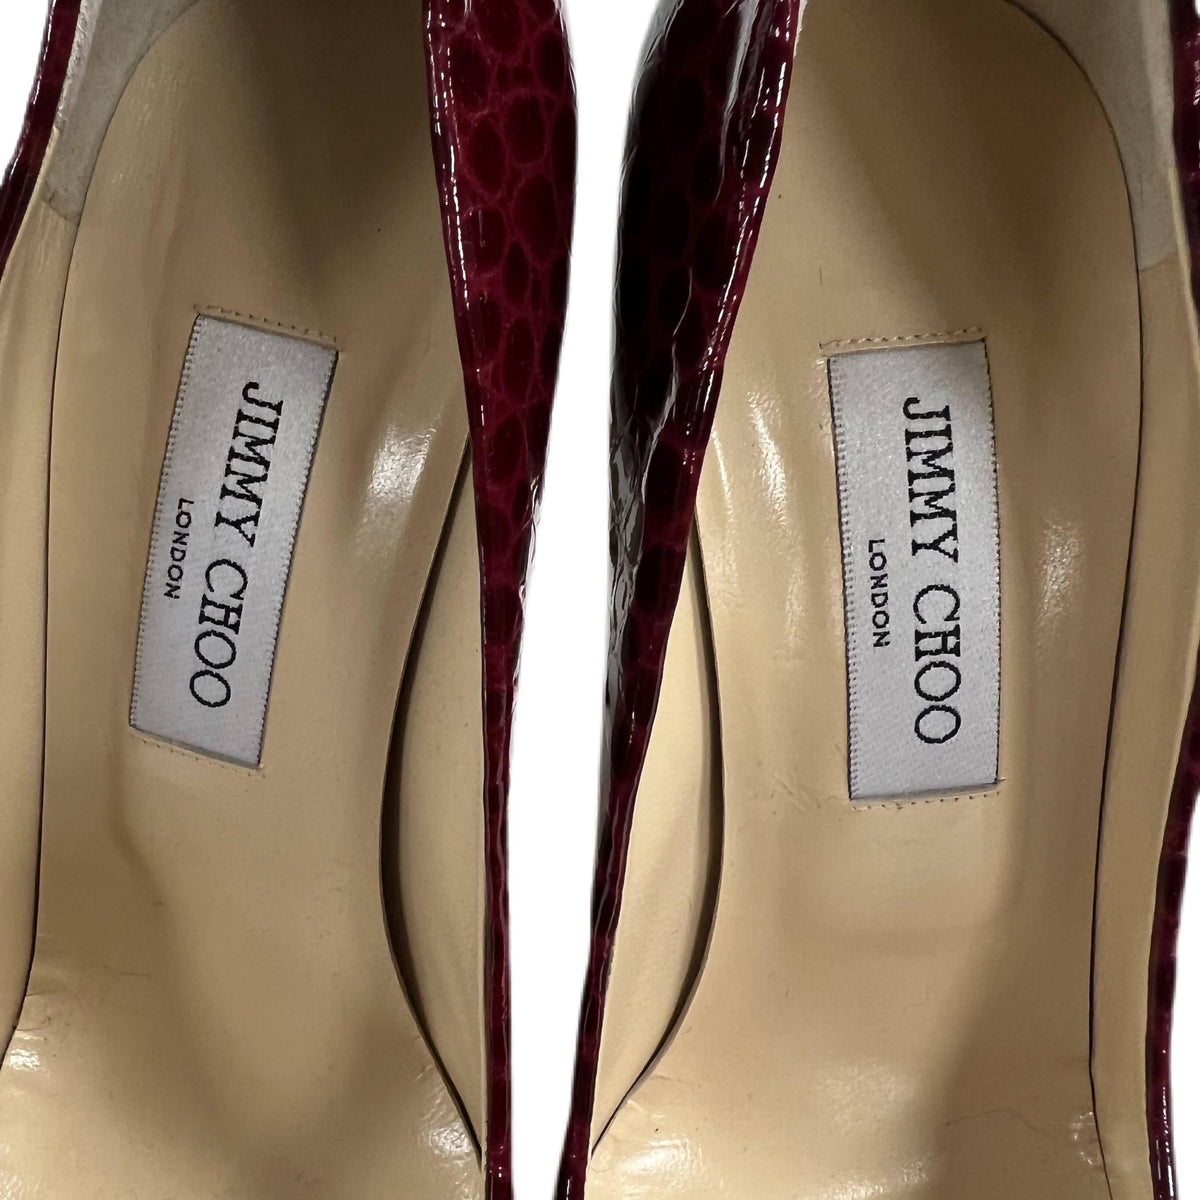 Pre-owned JIMMY CHOO Burgundy Red 'Croc' Effect Pumps | Size 39.5 - theREMODA